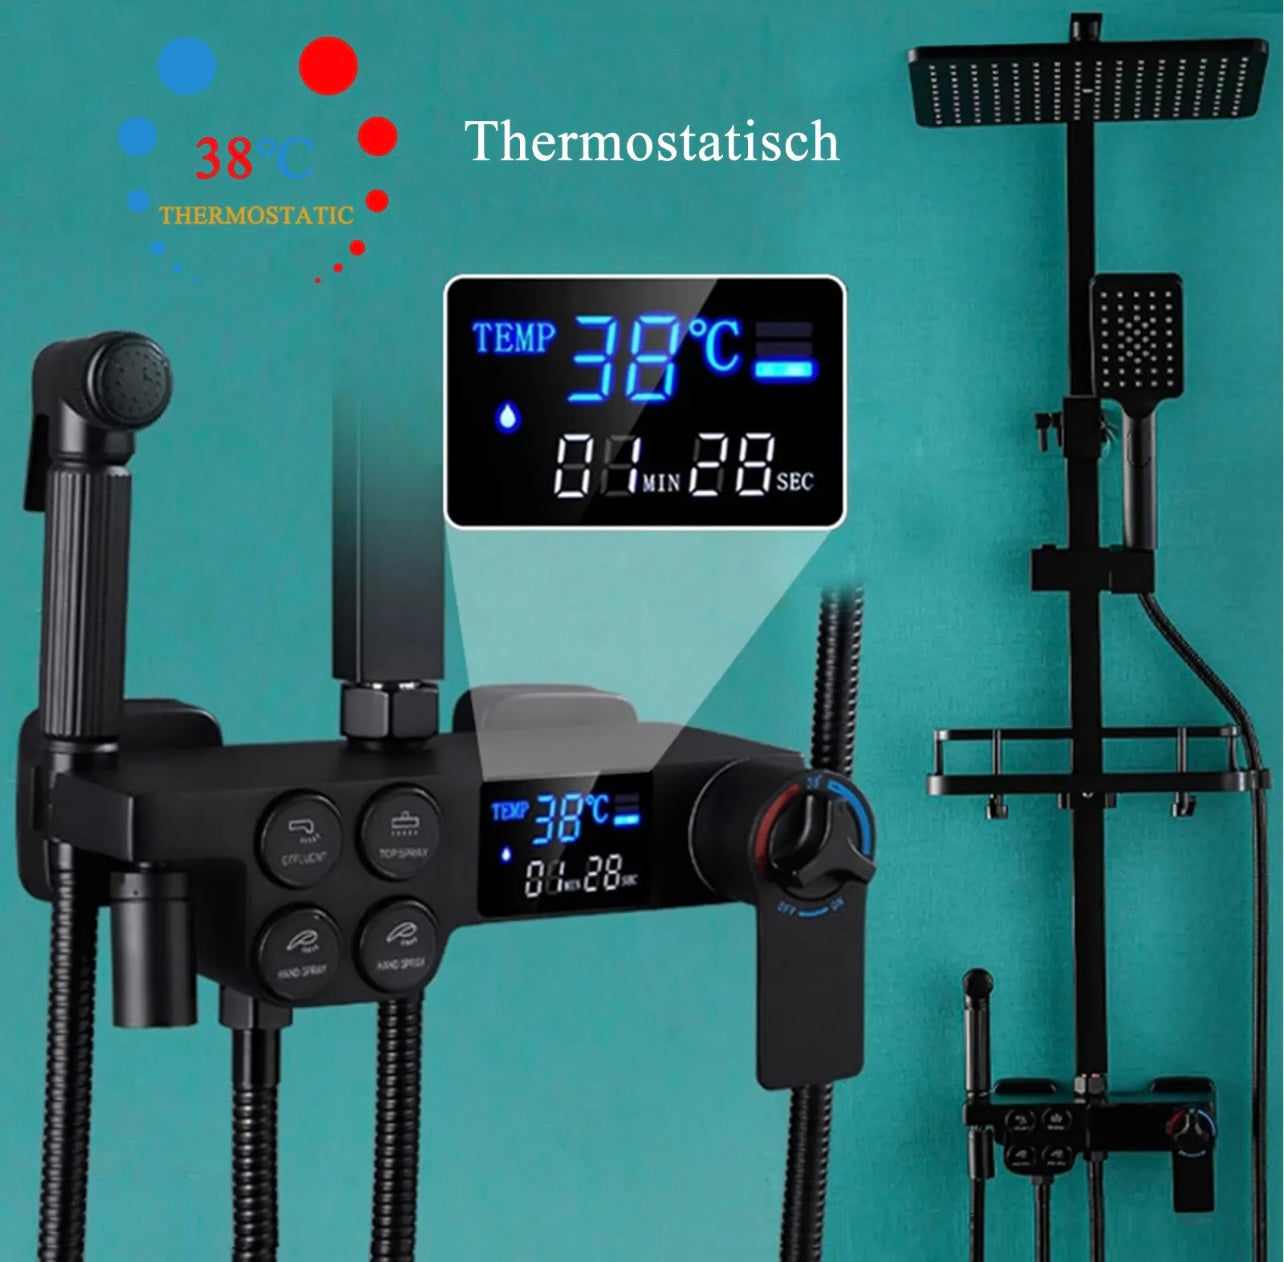 4 In 1 Rainfall Thermostatic Exposed Shower System With LCD Display